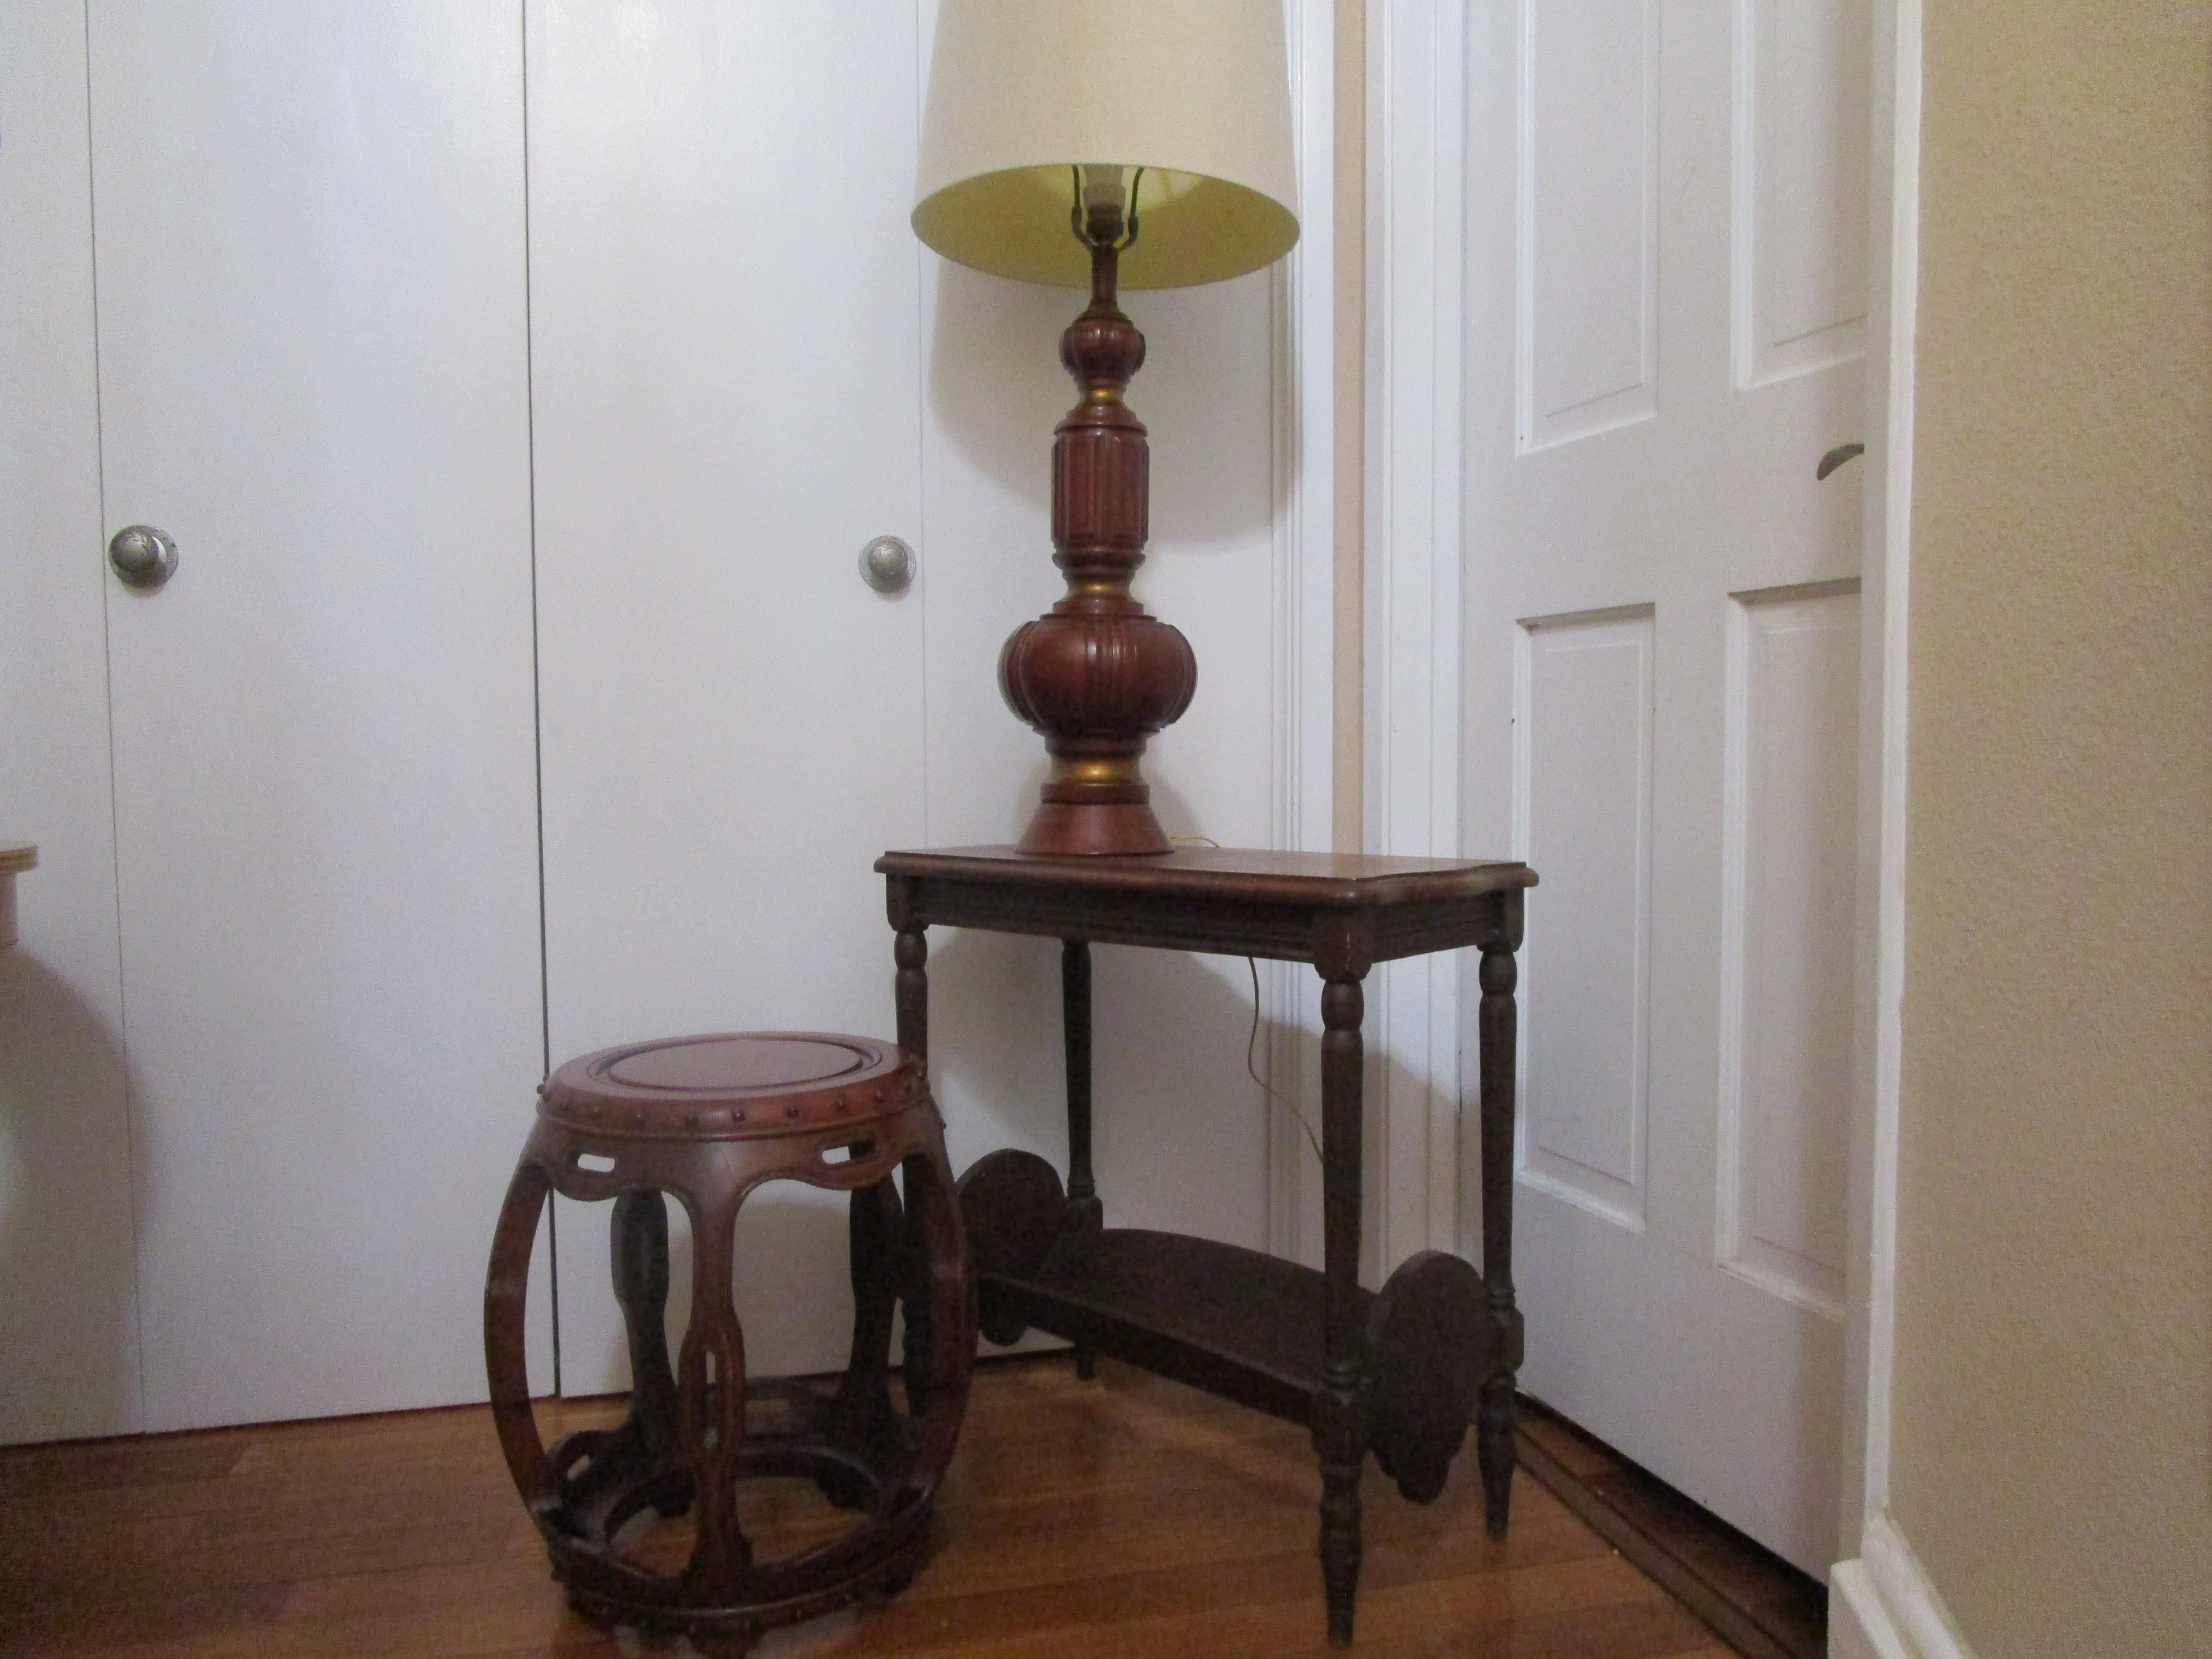 20th Century Rosewood Chinese Barrel Shaped Garden Stool with Rich Patina